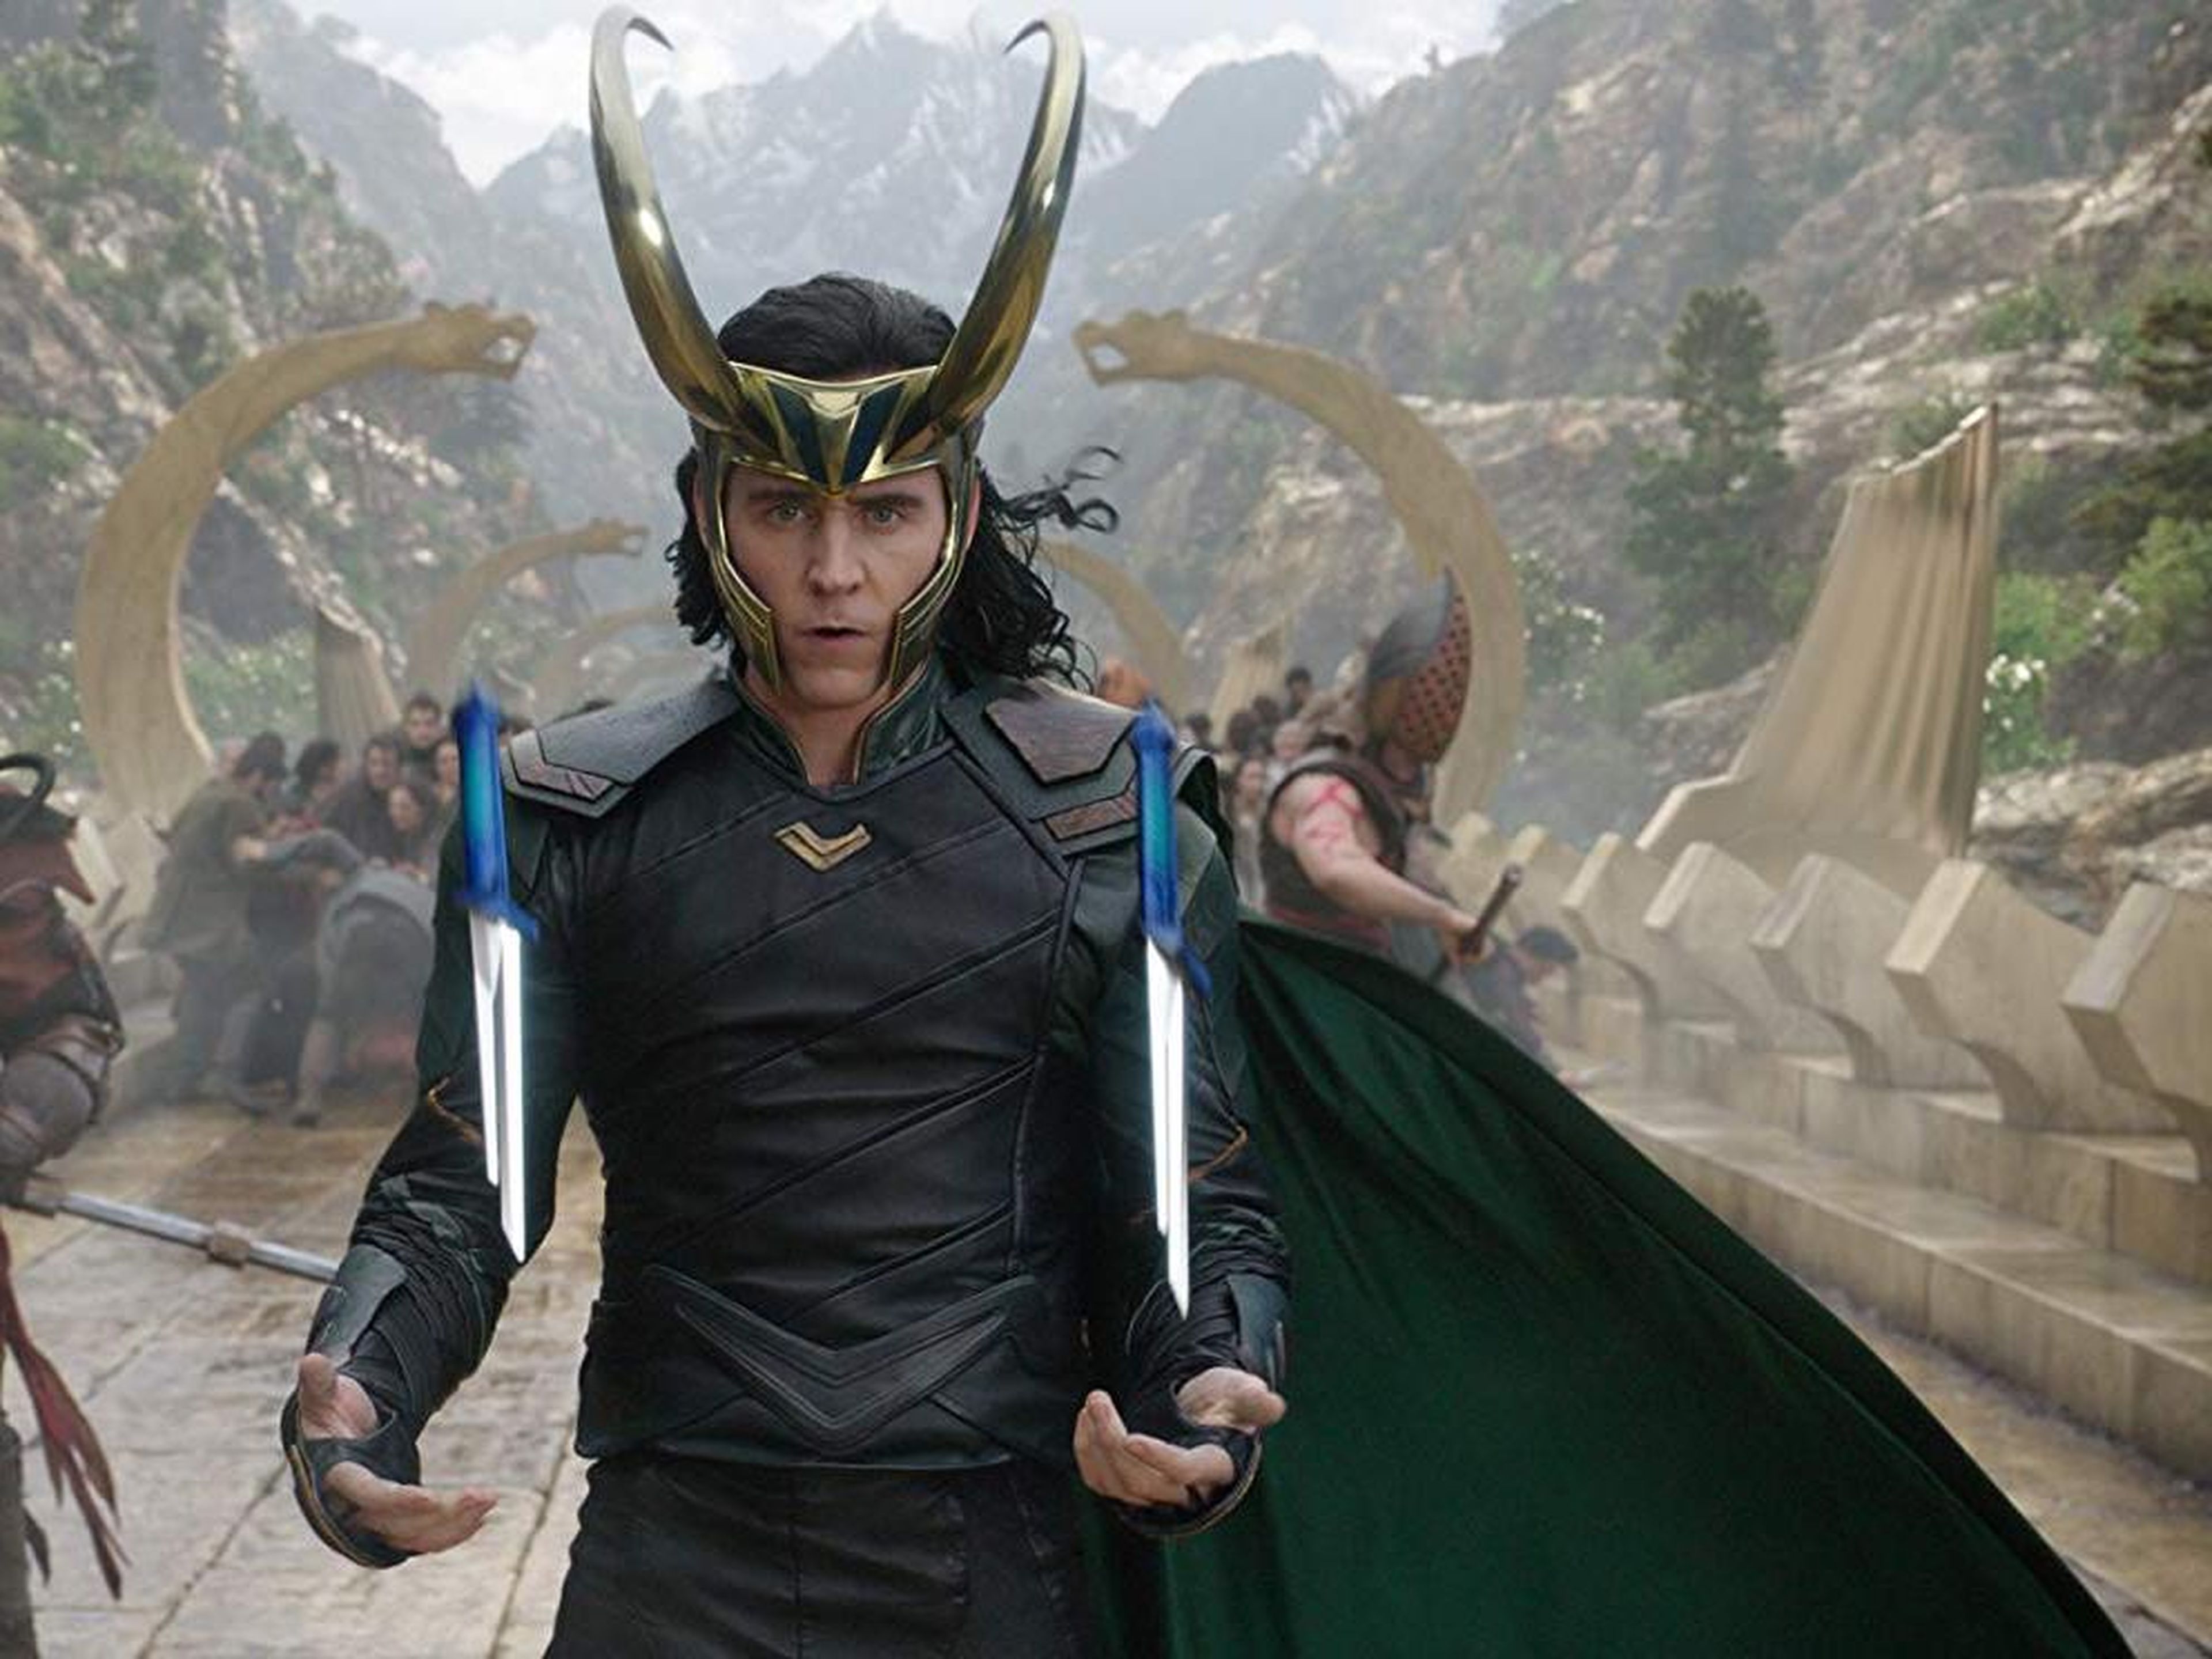 After losing Loki at the start of "Avengers: Infinity War," Loki will be back on his own show.